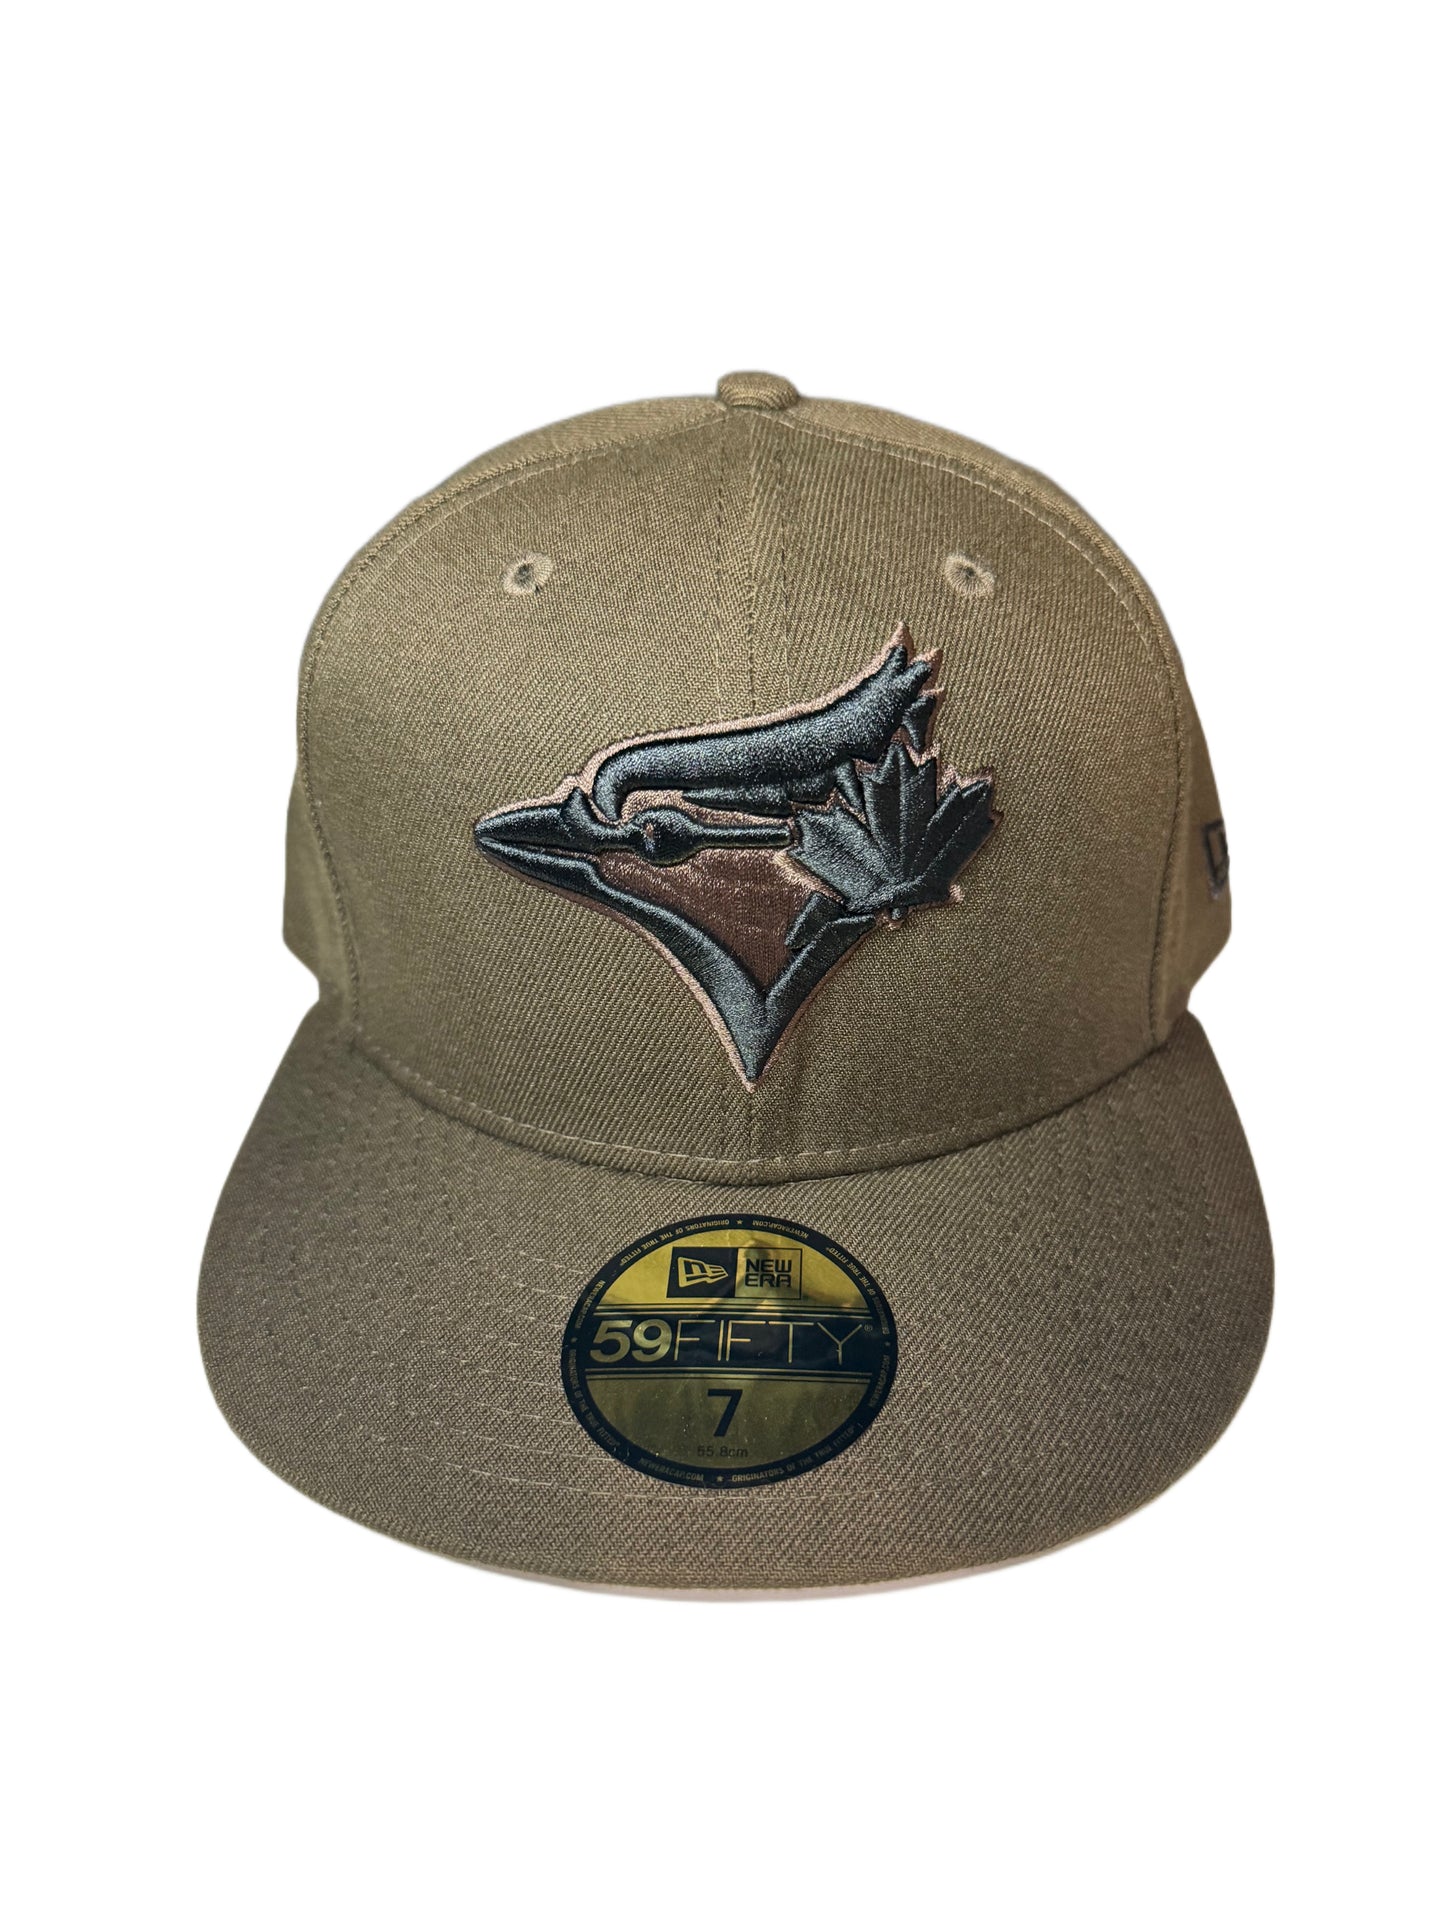 Blue Jays Fitted